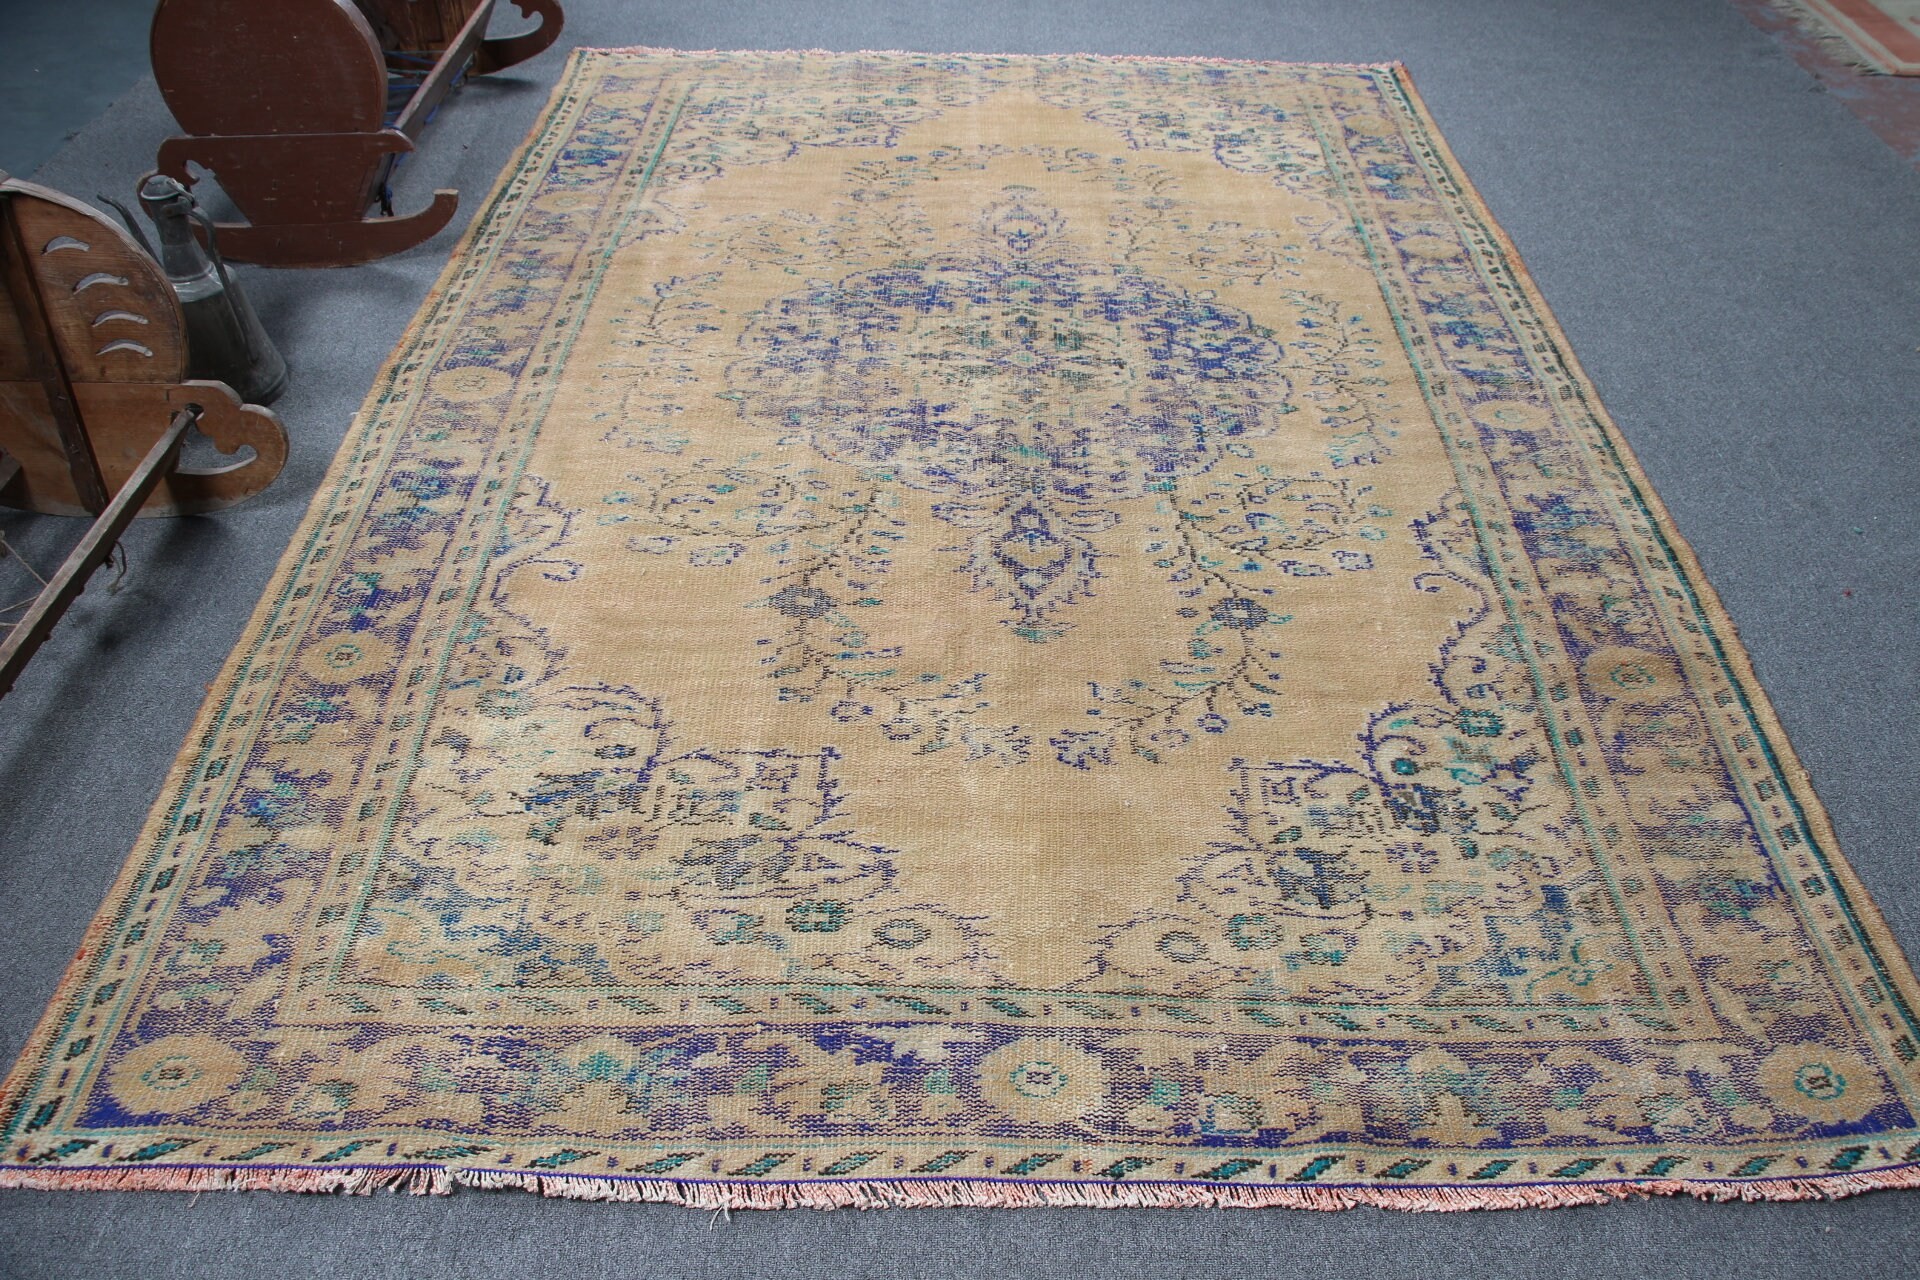 Moroccan Rugs, Salon Rug, Bright Rug, 6.4x9.4 ft Large Rugs, Brown Antique Rugs, Vintage Rug, Turkish Rug, Home Decor Rugs, Dining Room Rug